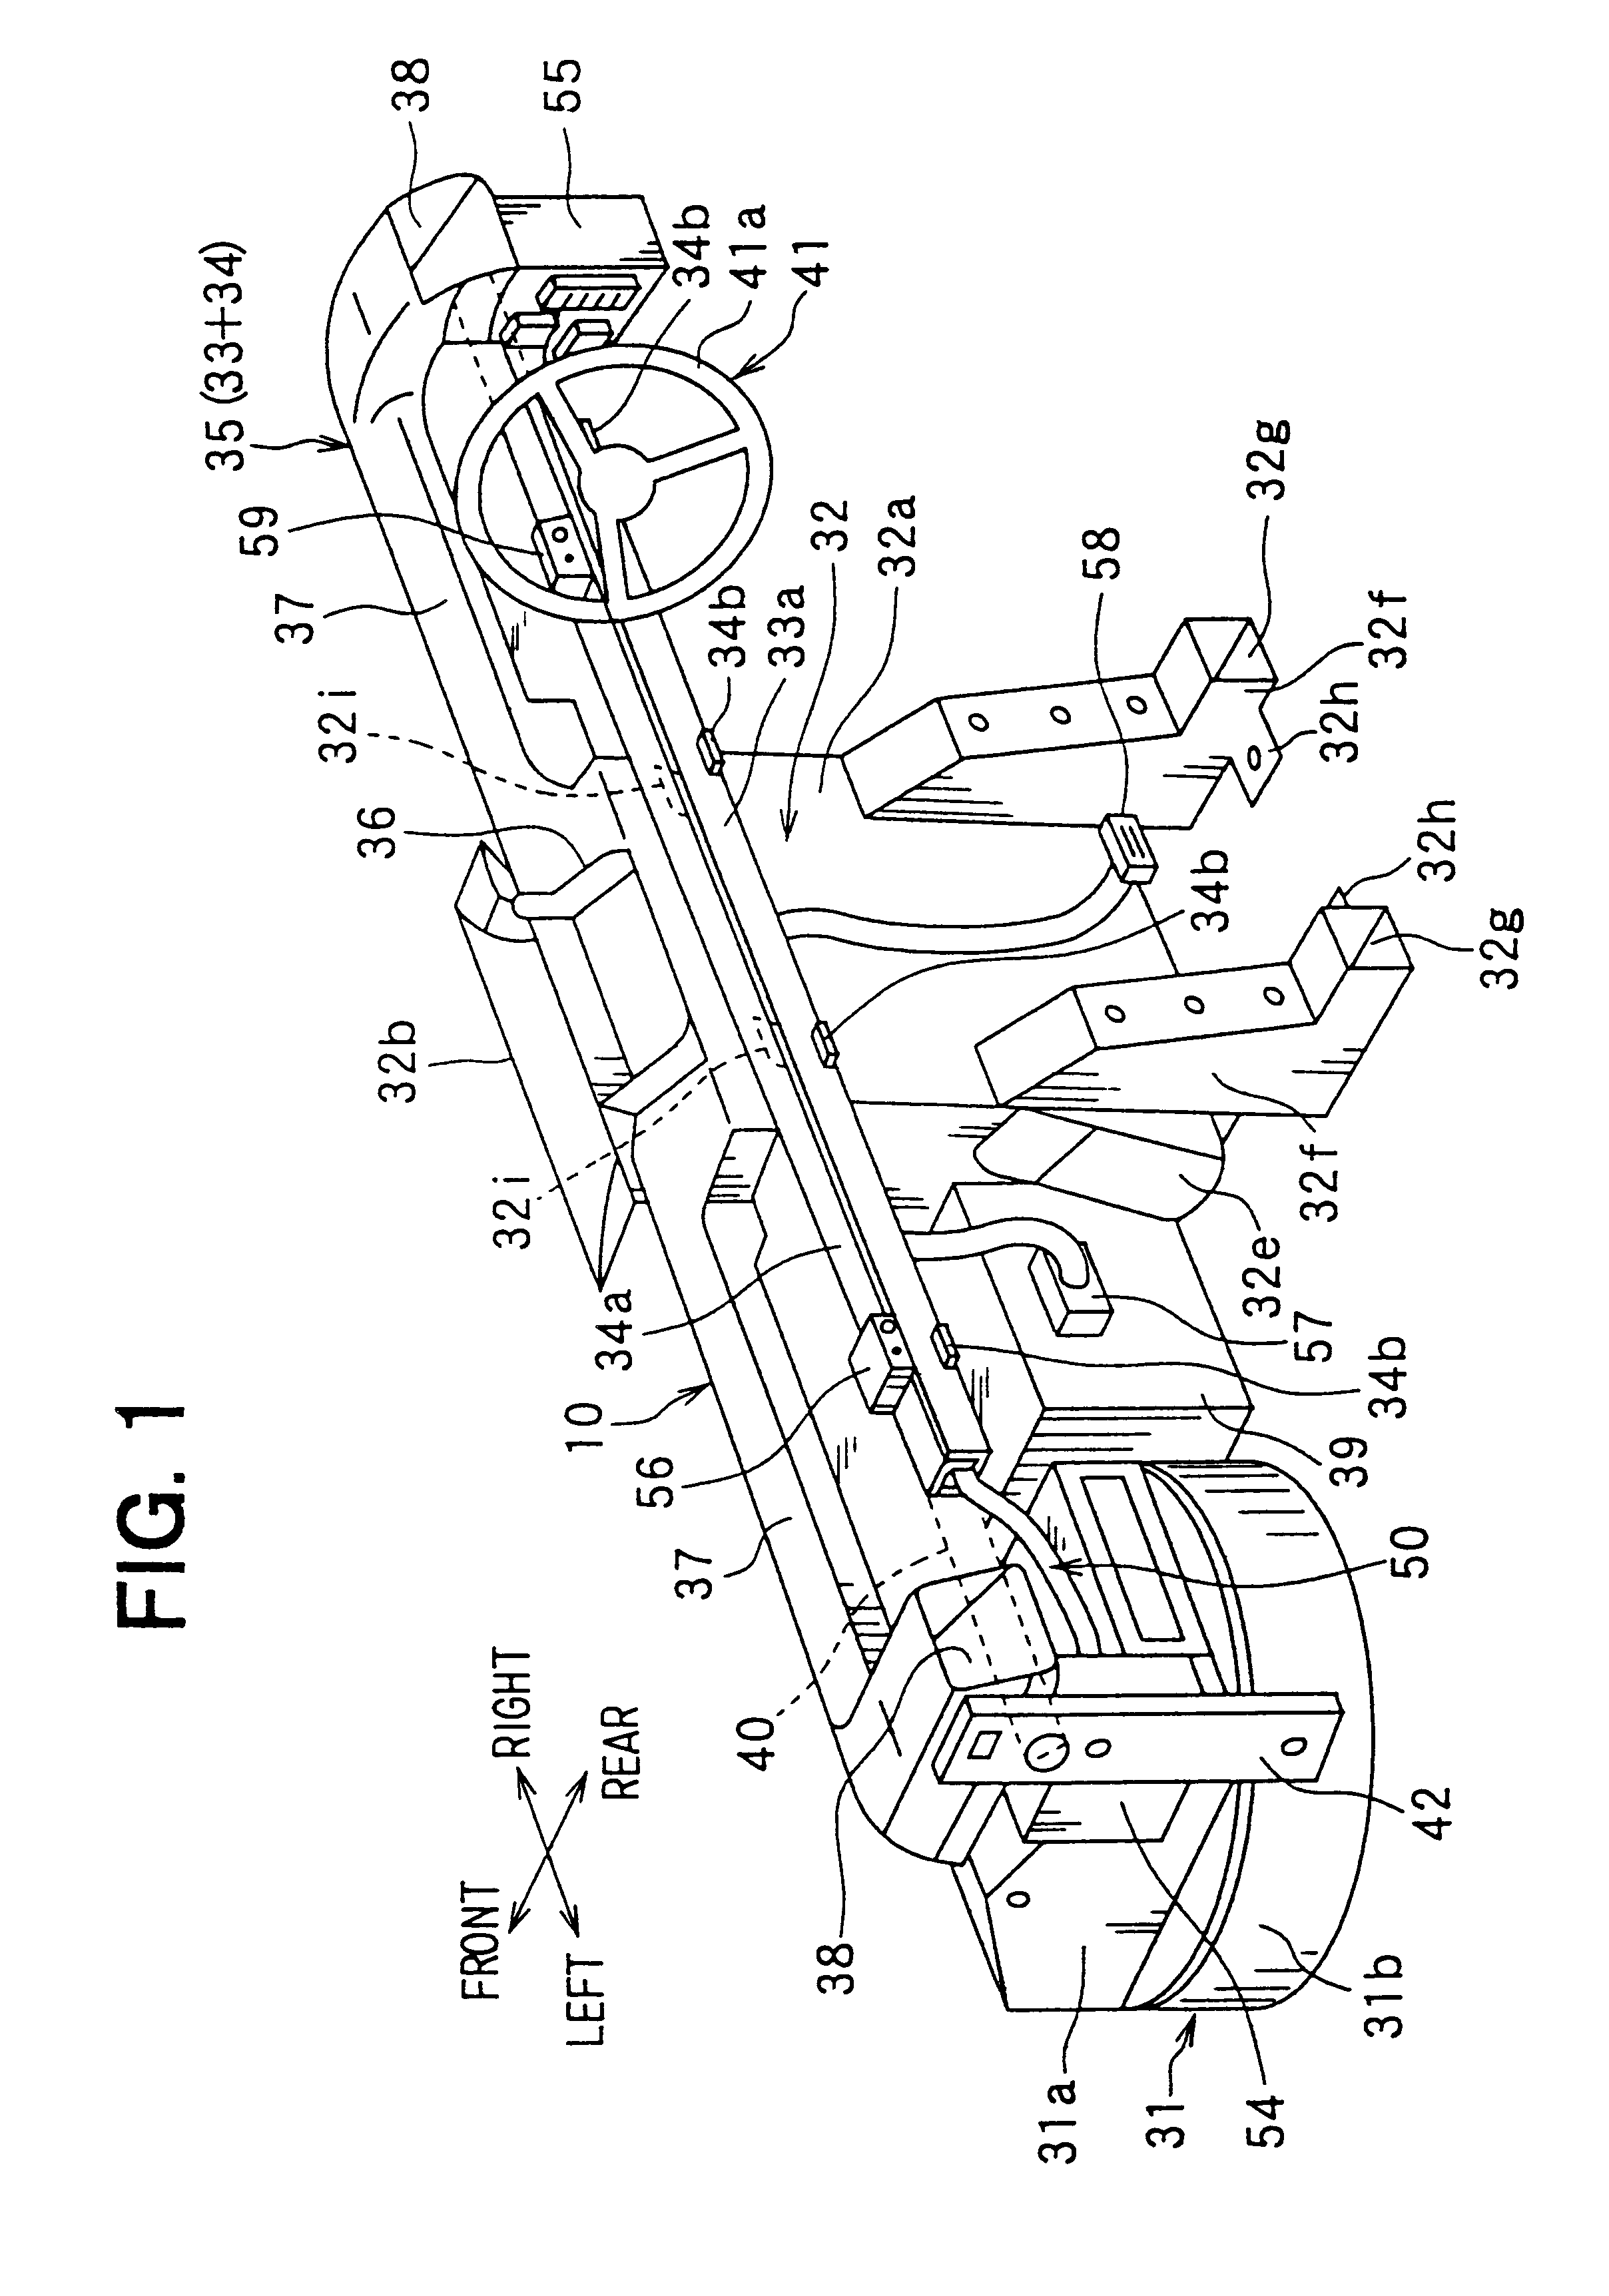 Wiring system of indication instrument for vehicle